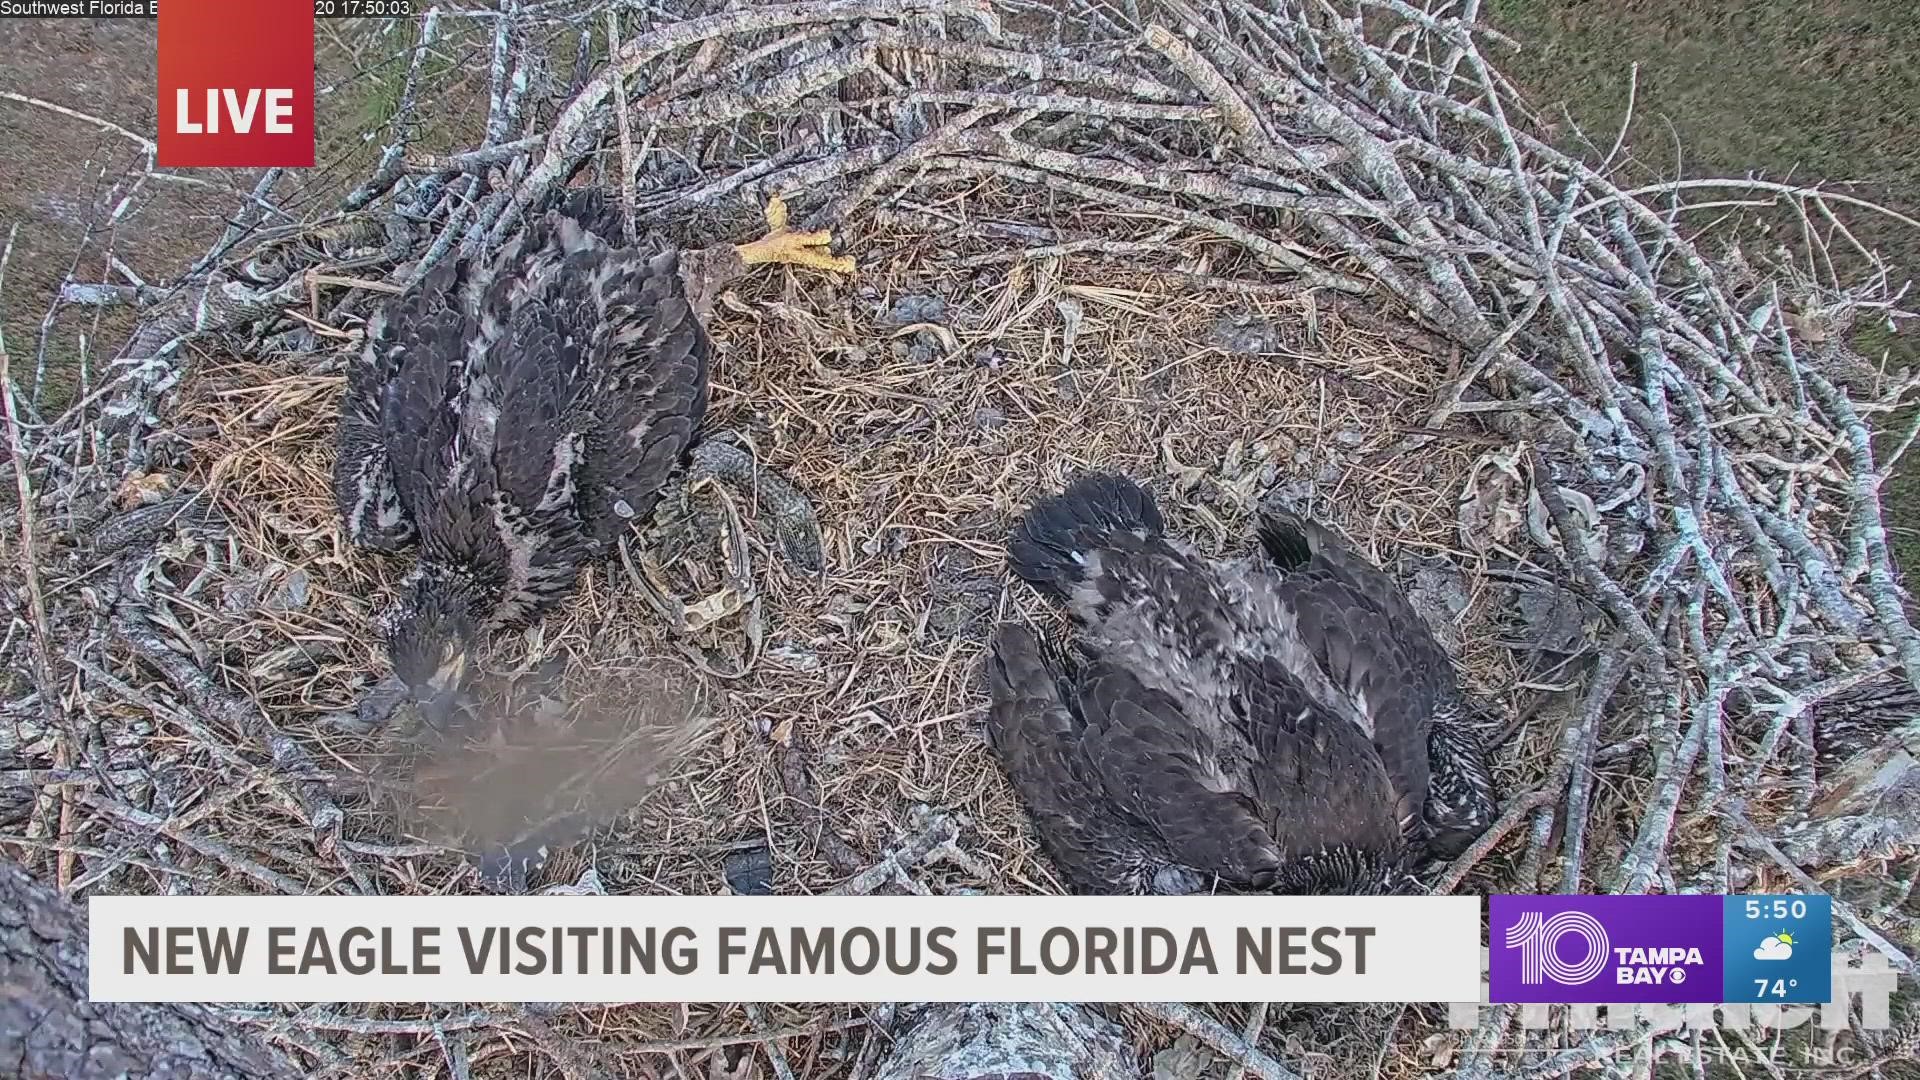 The beloved Southwest Florida eagle, Harriet, still hasn't returned to the nest after disappearing toward the beginning of February.